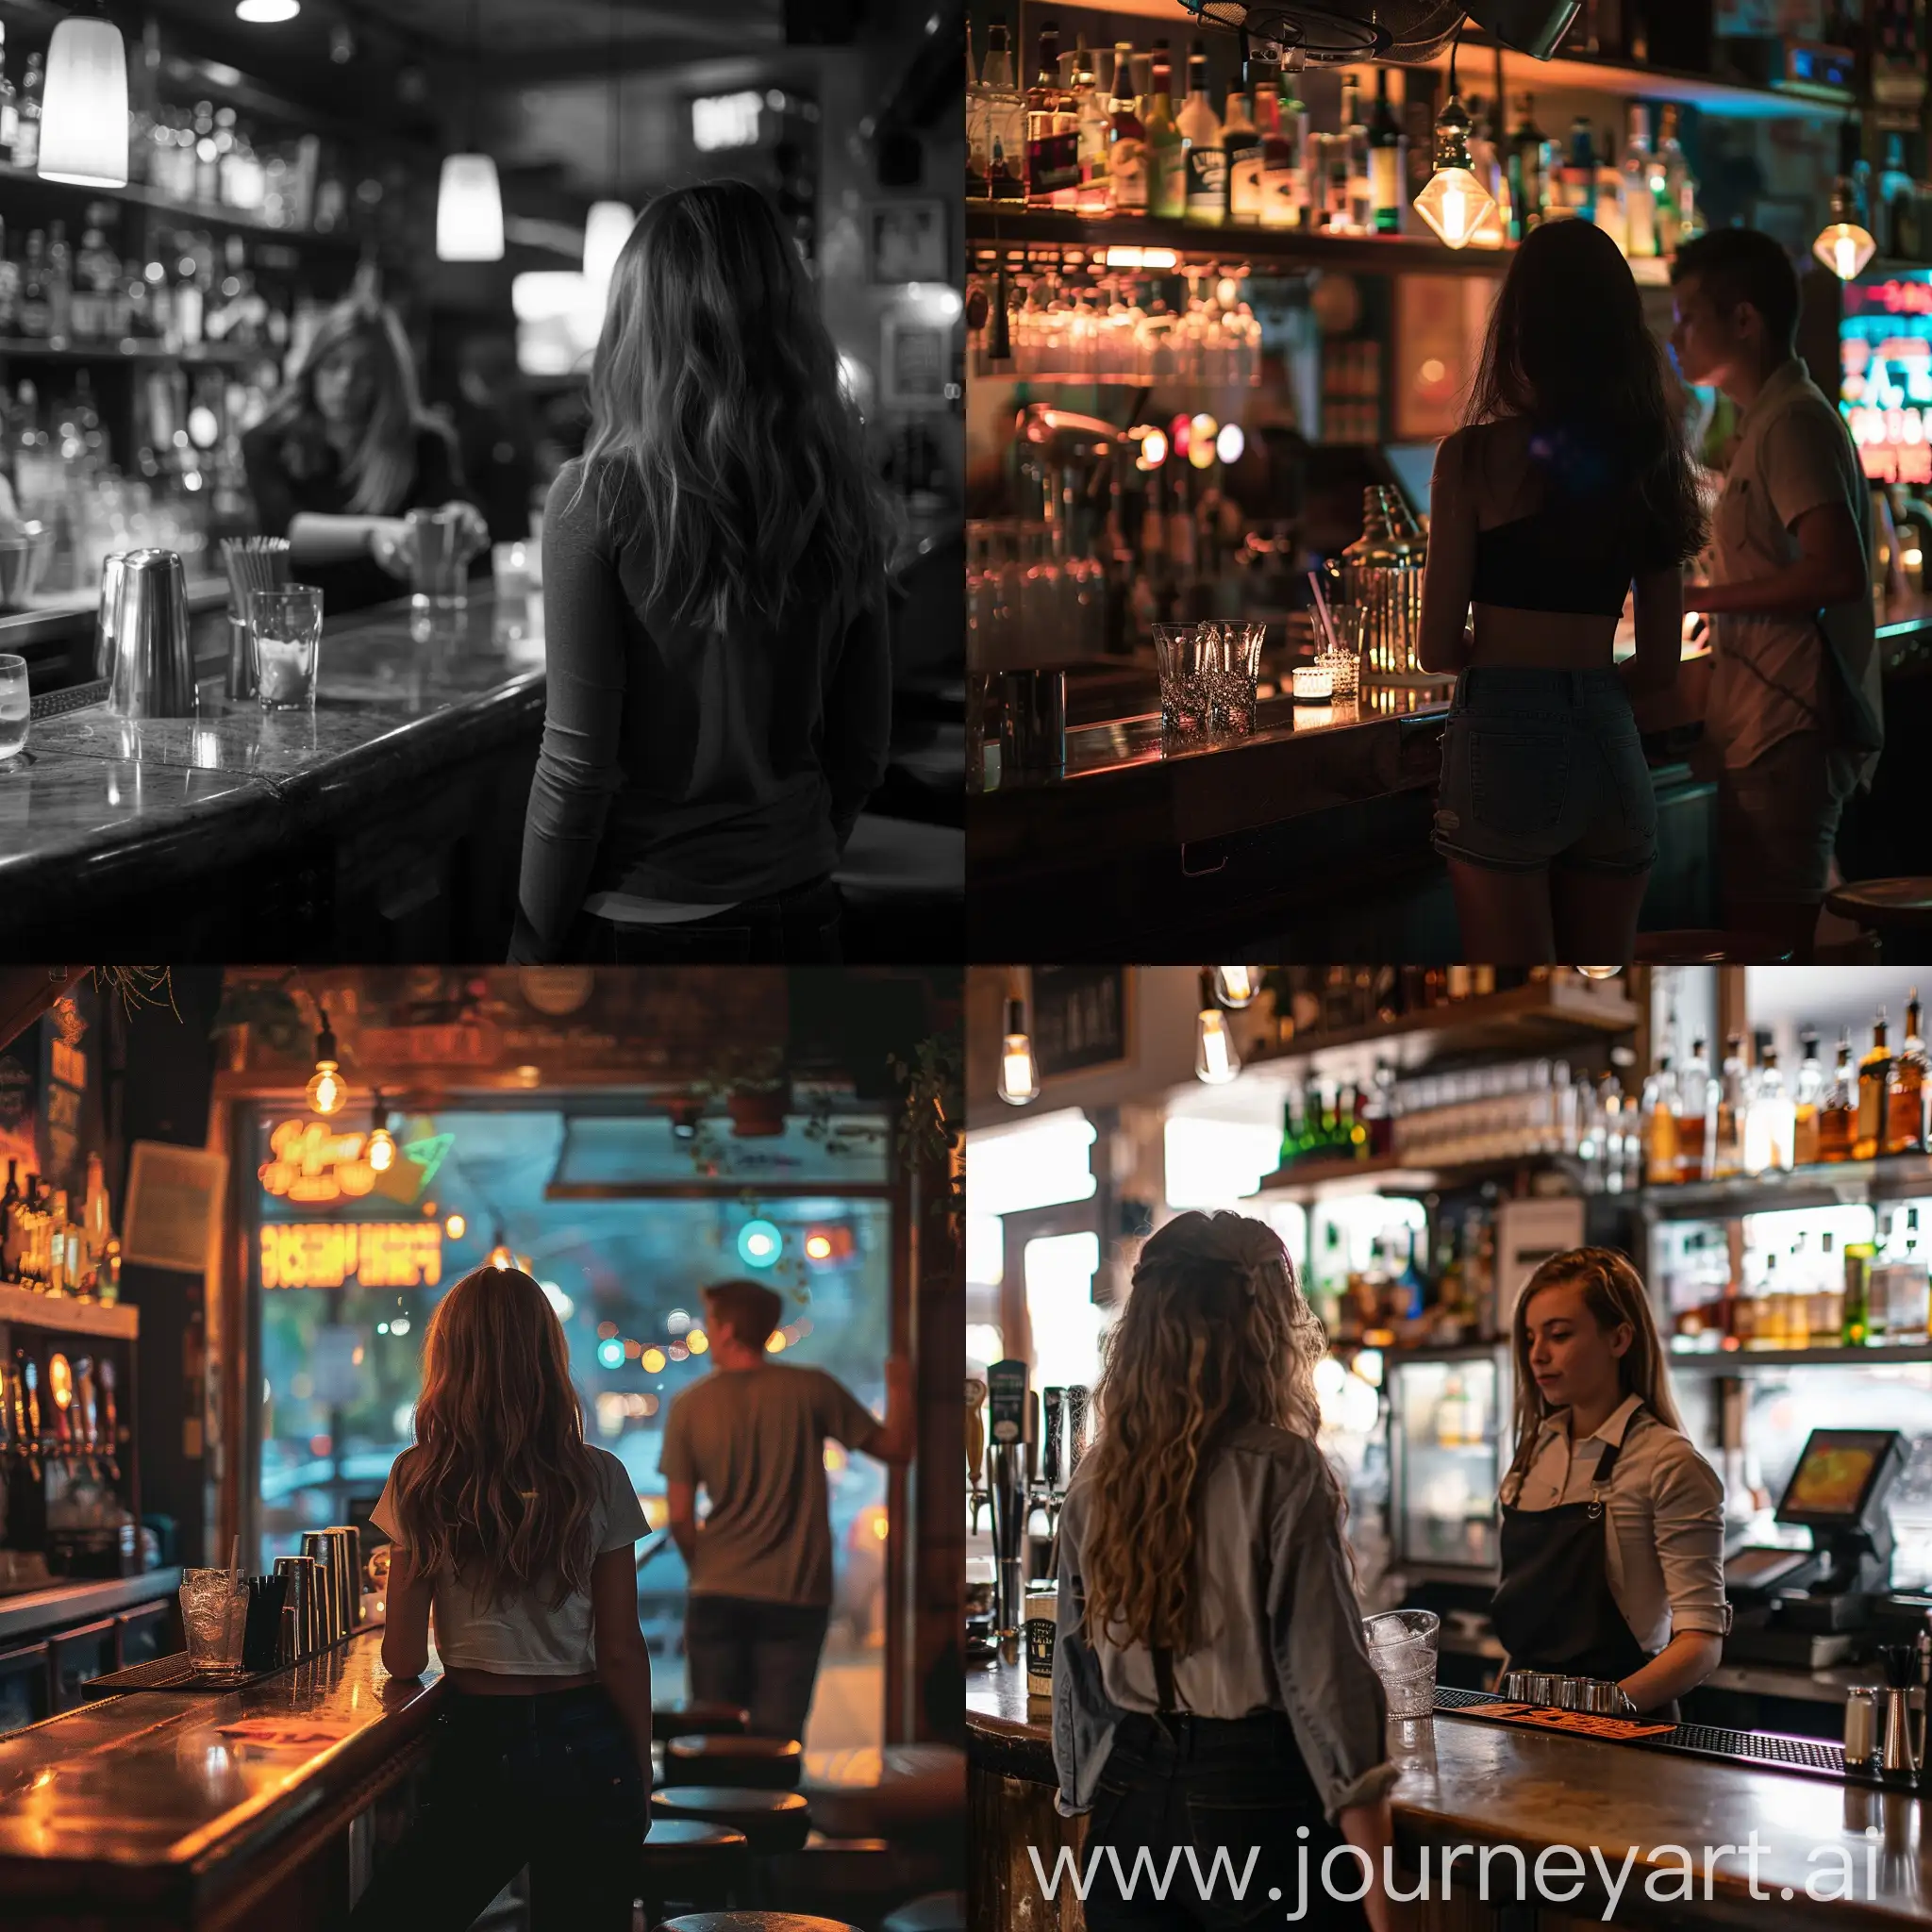 phone poto of a girl standing at the bar. she is facing towards the bartender.